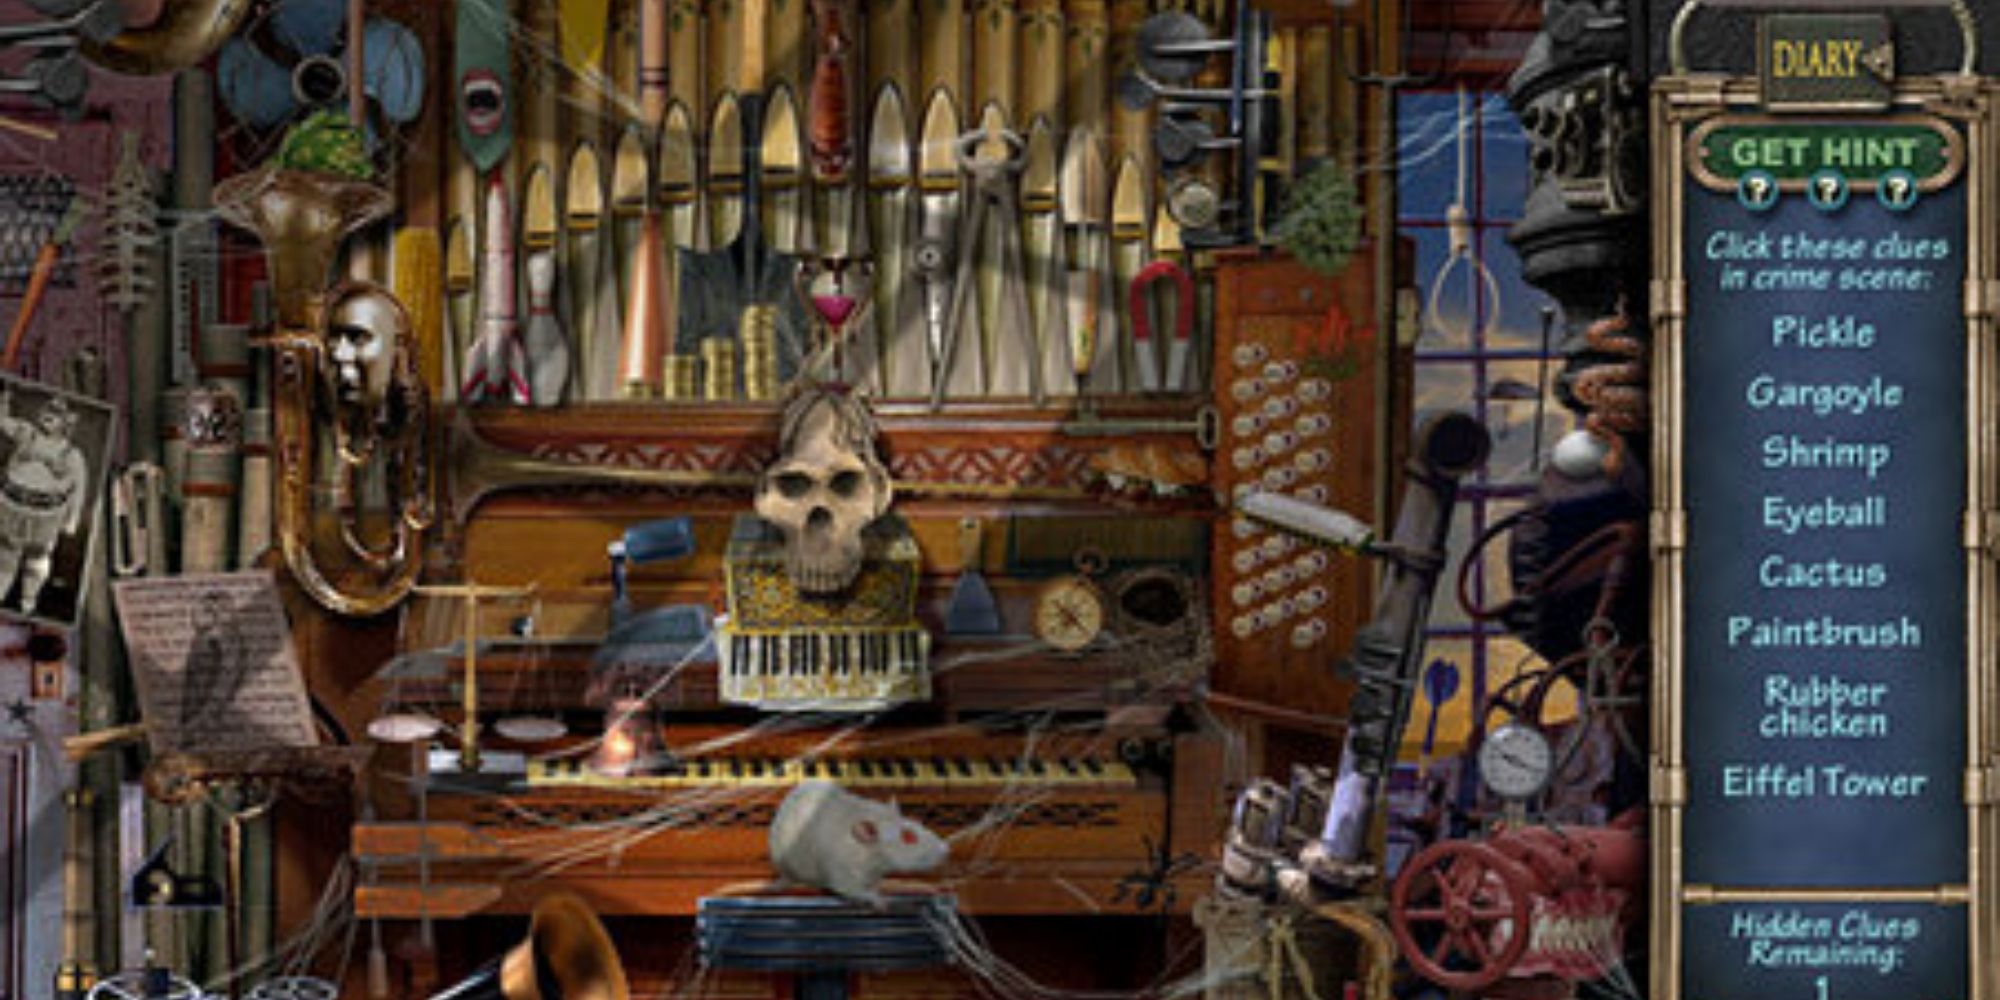 A large organ covered in cobwebs and some other junk for the hidden object game